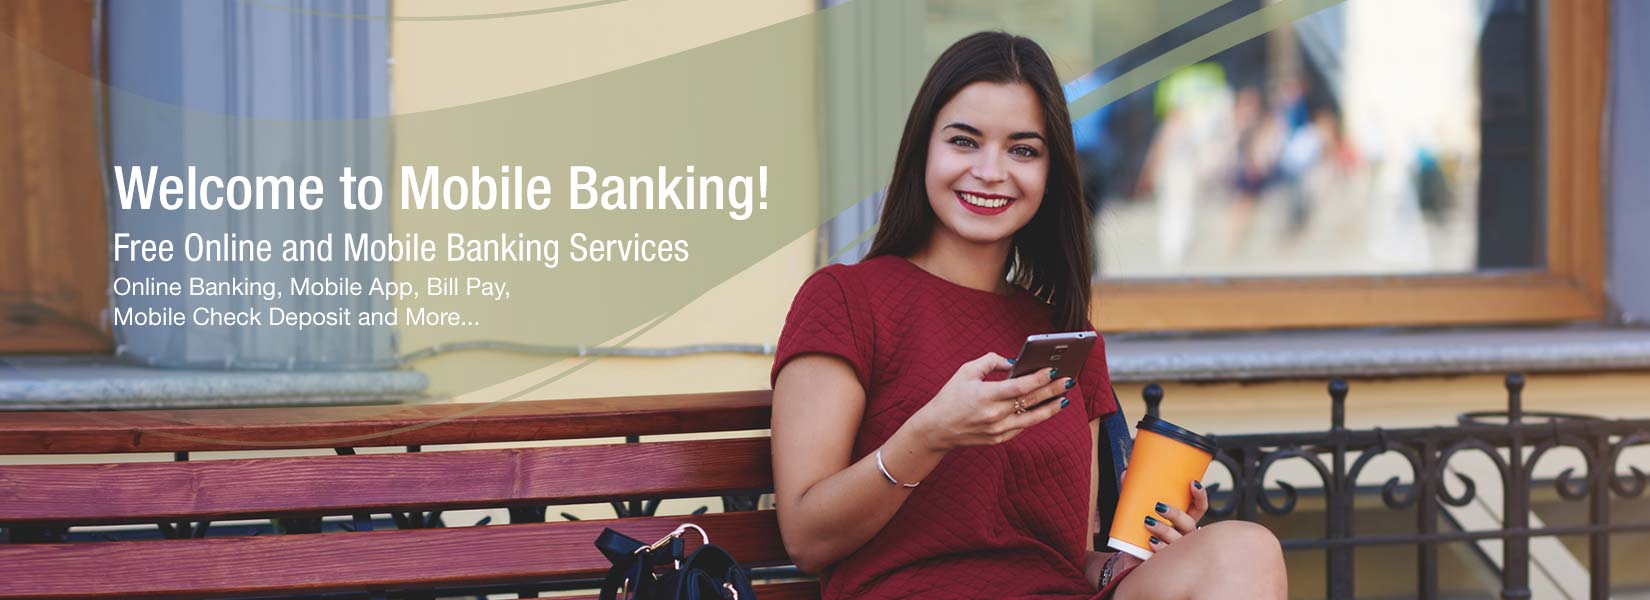 Mobile Banking at your finger tips!